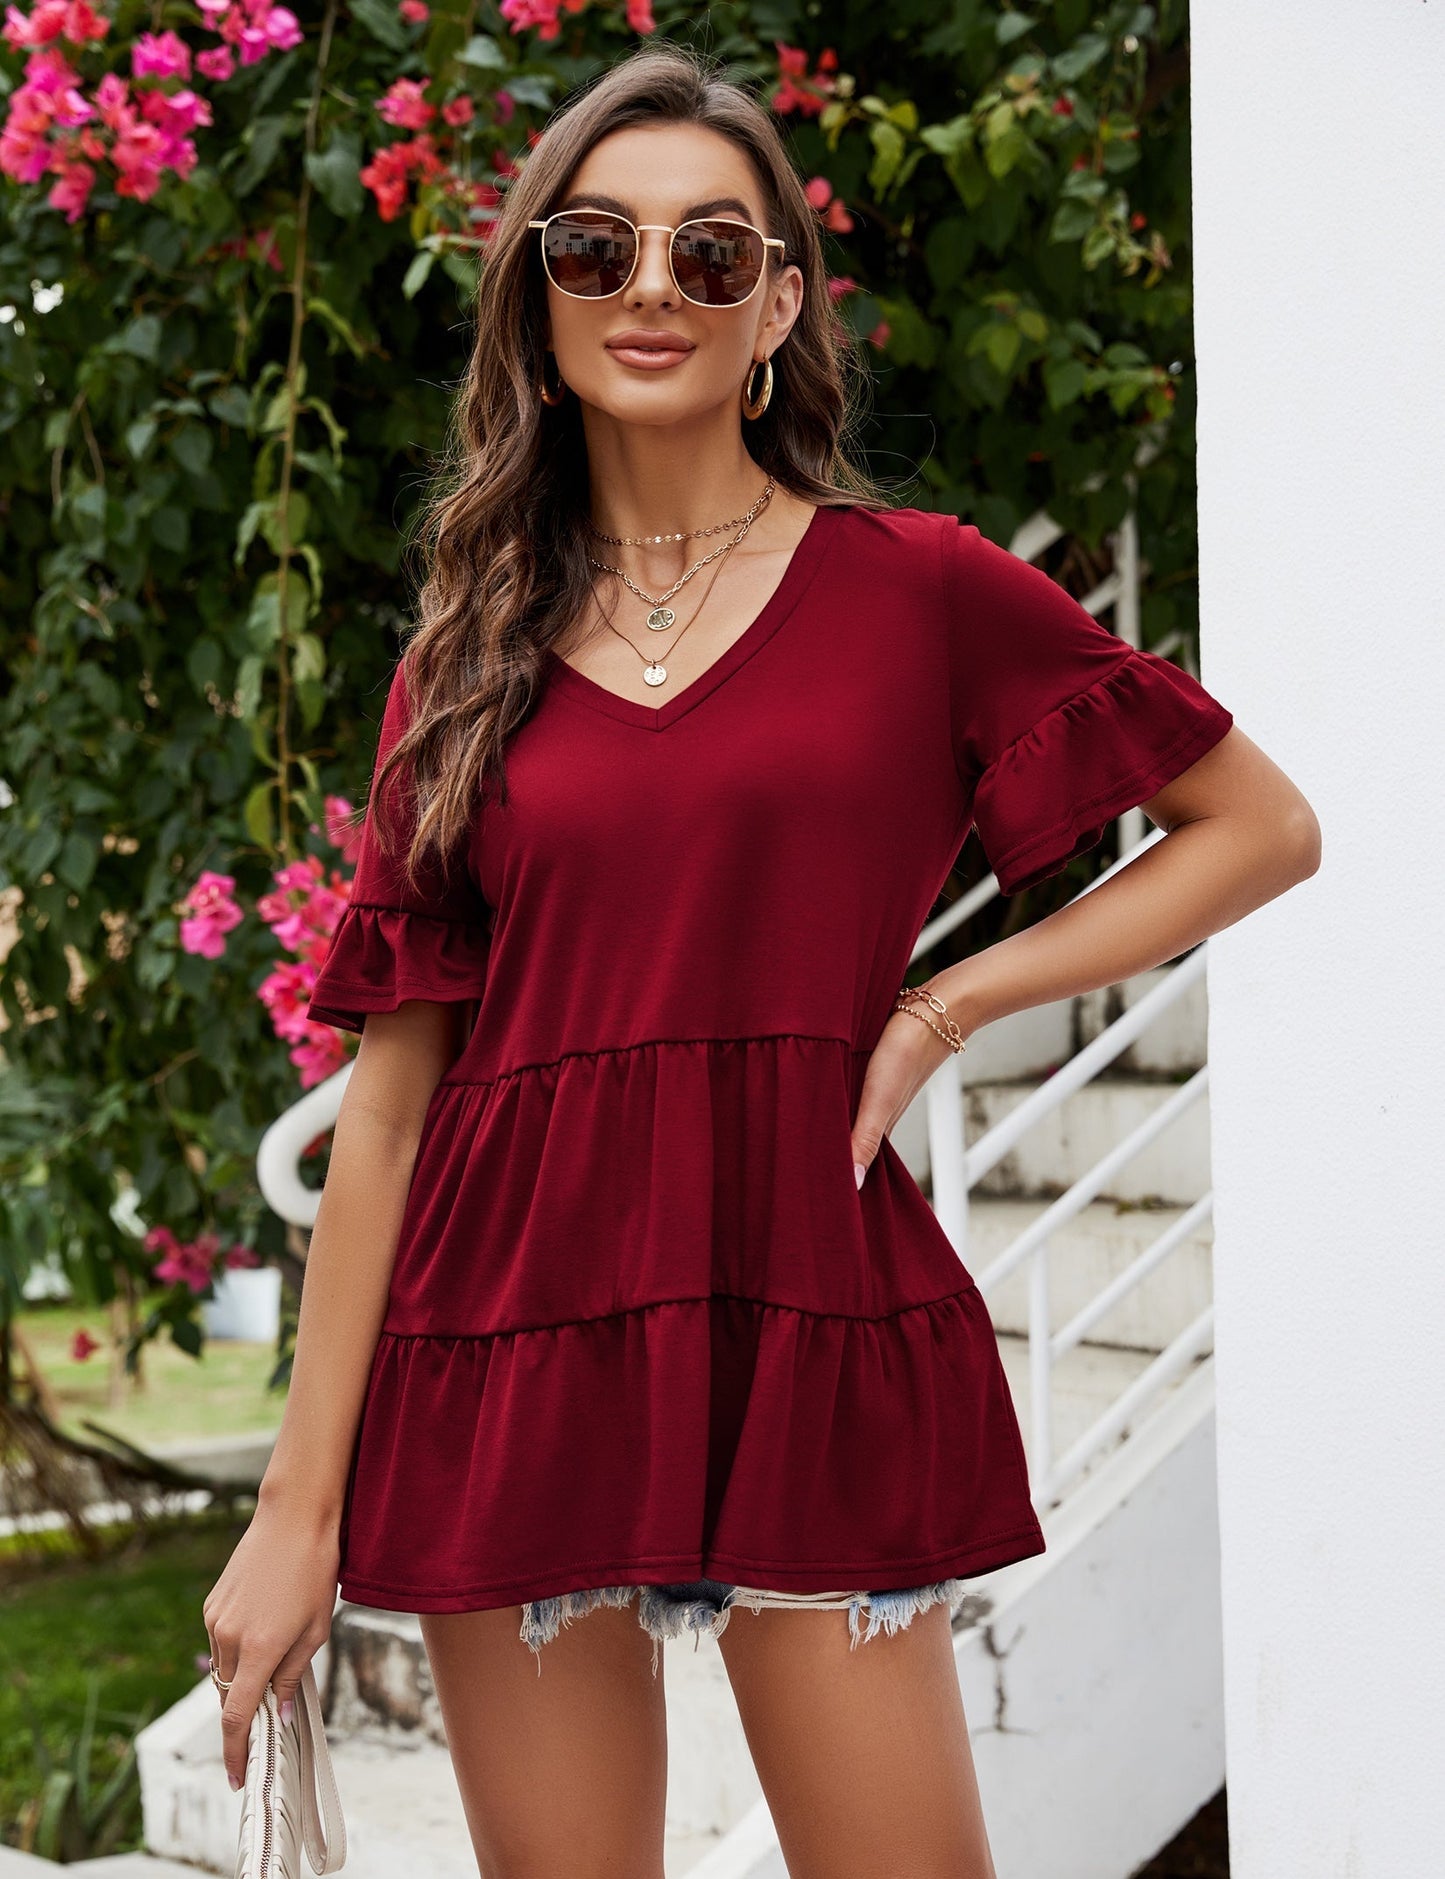 CLEARLOVE Peplum Tops for Women Summer Casual V Neck T Shirts Wine Red